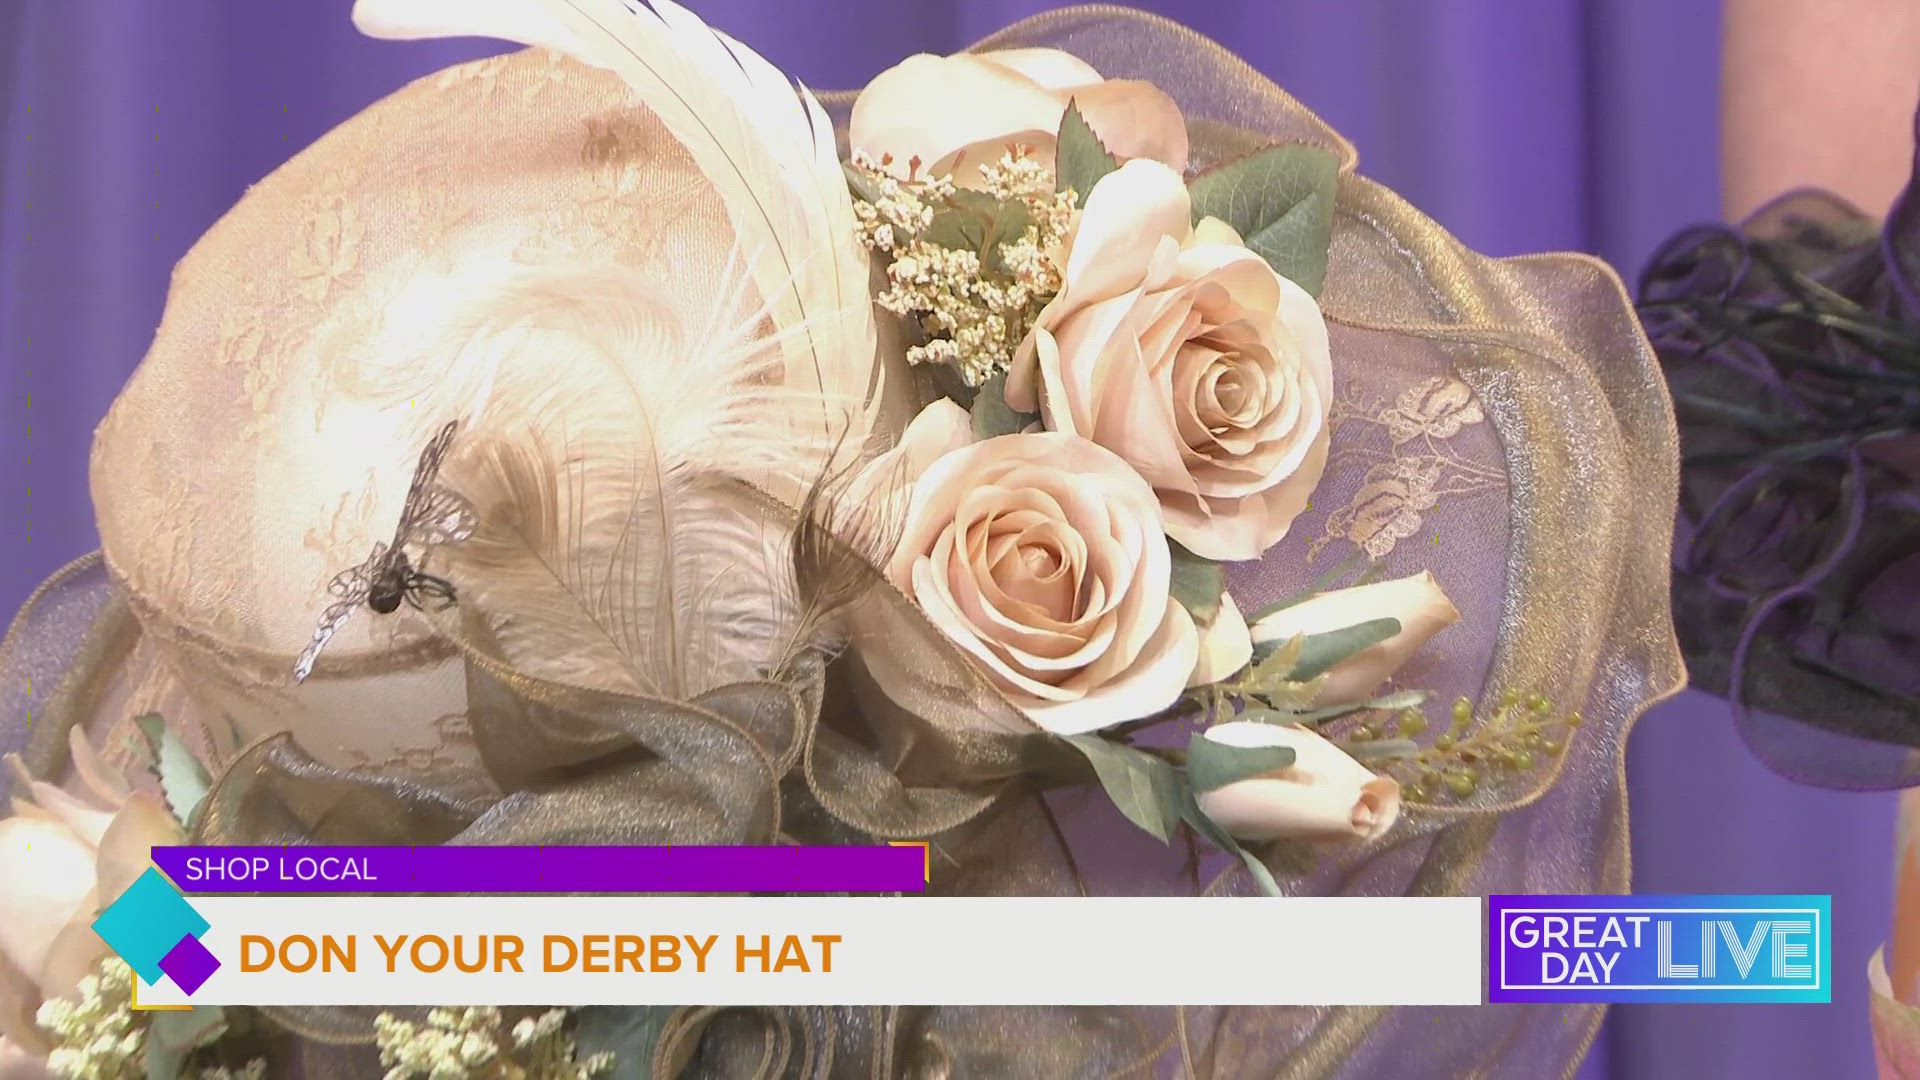 Skip Amazon and shop local for your Derby Hat. South Tampa Trading Company’s Anne Bartlett shows us what she has in her store.